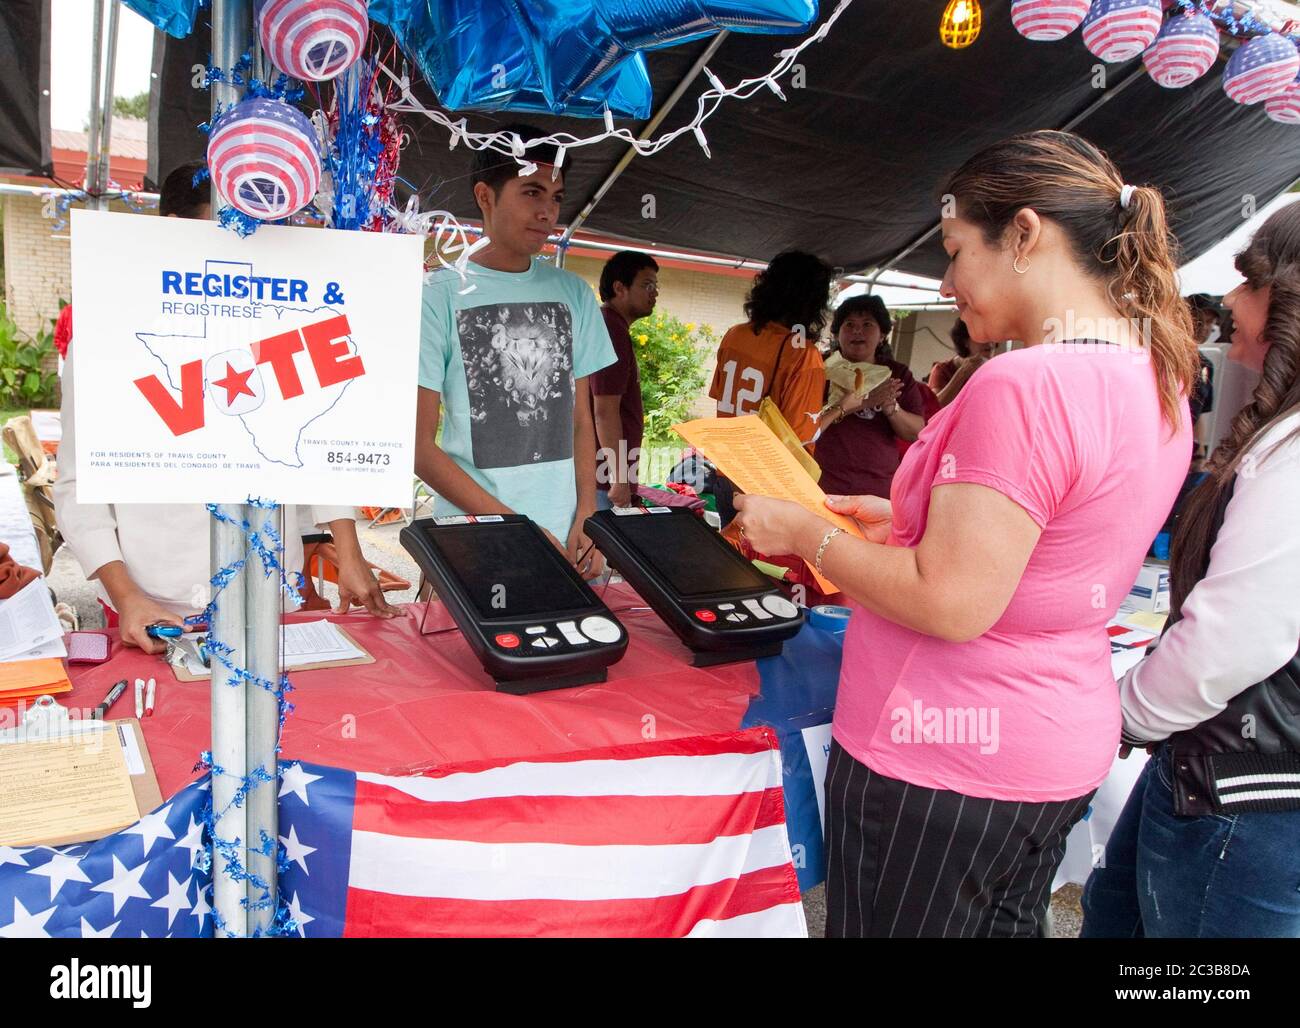 Austin Texas USA, October 6, 2012.: Volunteers man voter registration booth at Catholic Church festival. The booth includes demonstrations of the electronic voting machines used in Texas   ©MKC / Daemmrich Photos Stock Photo